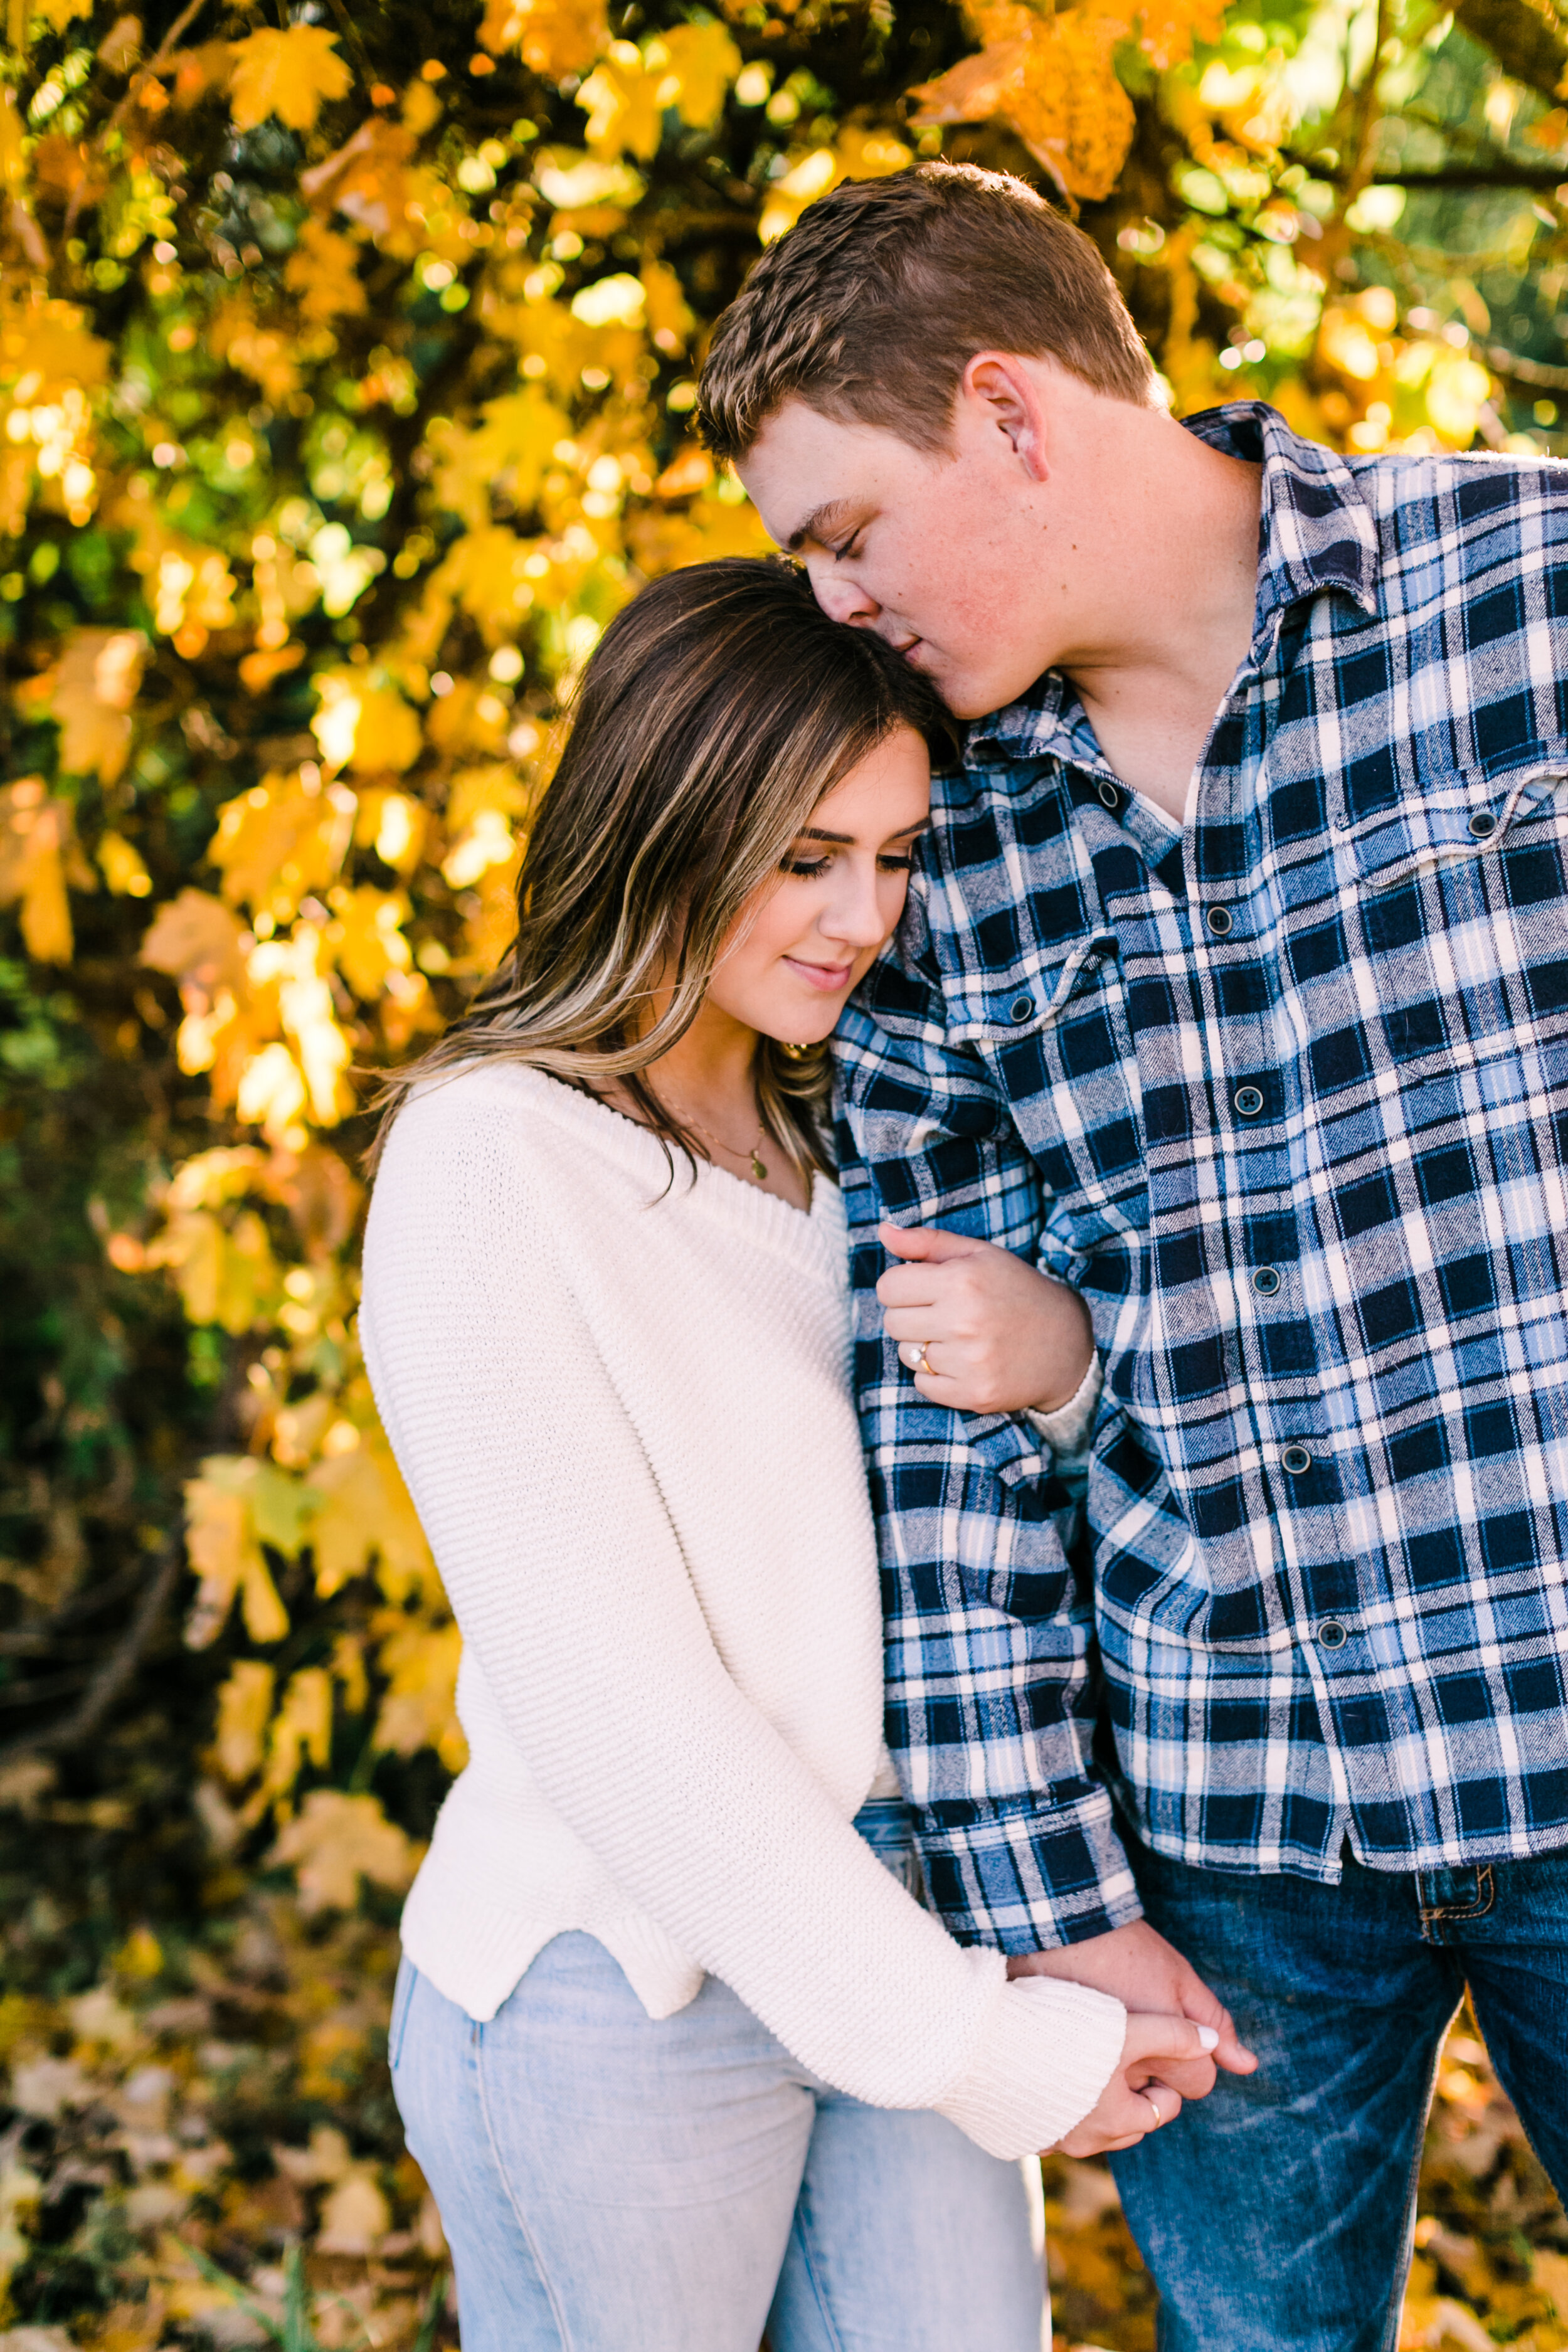 Tennessee+Fall+Engagement+Photos+Puppy (24 of 63).jpg